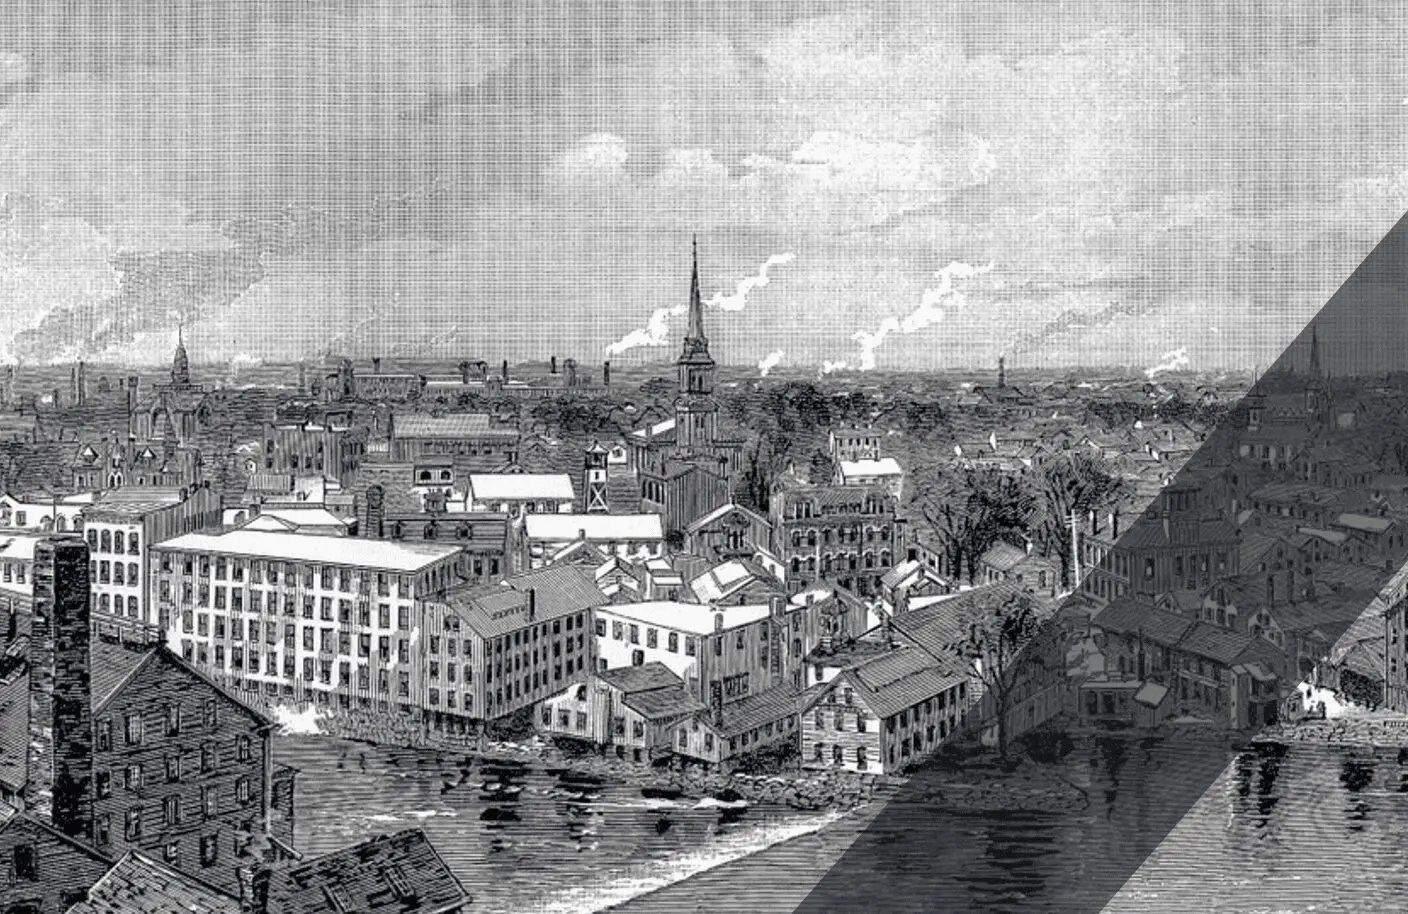 An old black and white drawing of a city.